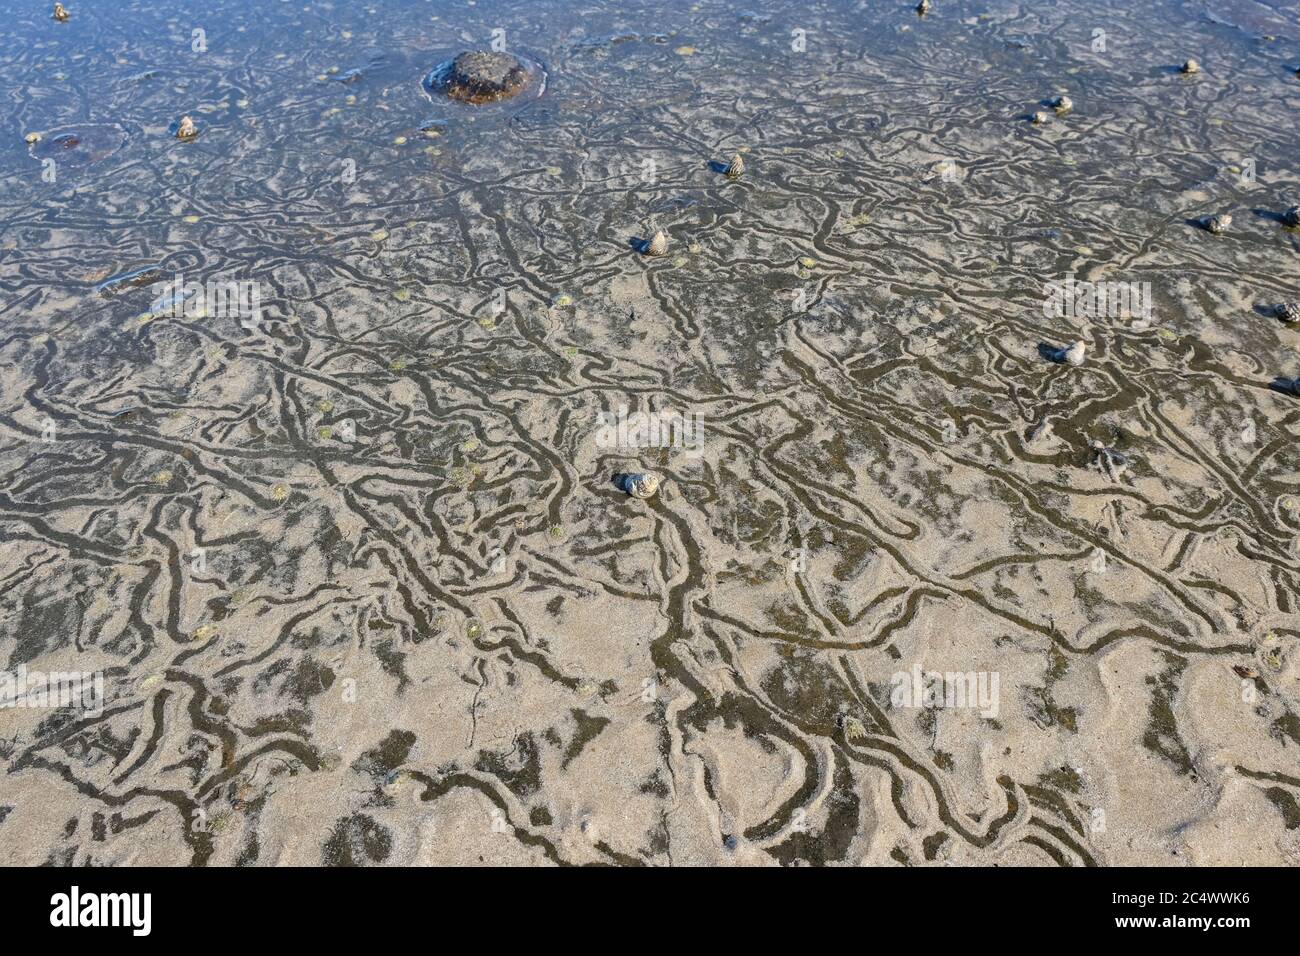 Looking down at trails, in wet sand, created by sea snails on a rock platform by the seashore. Stock Photo